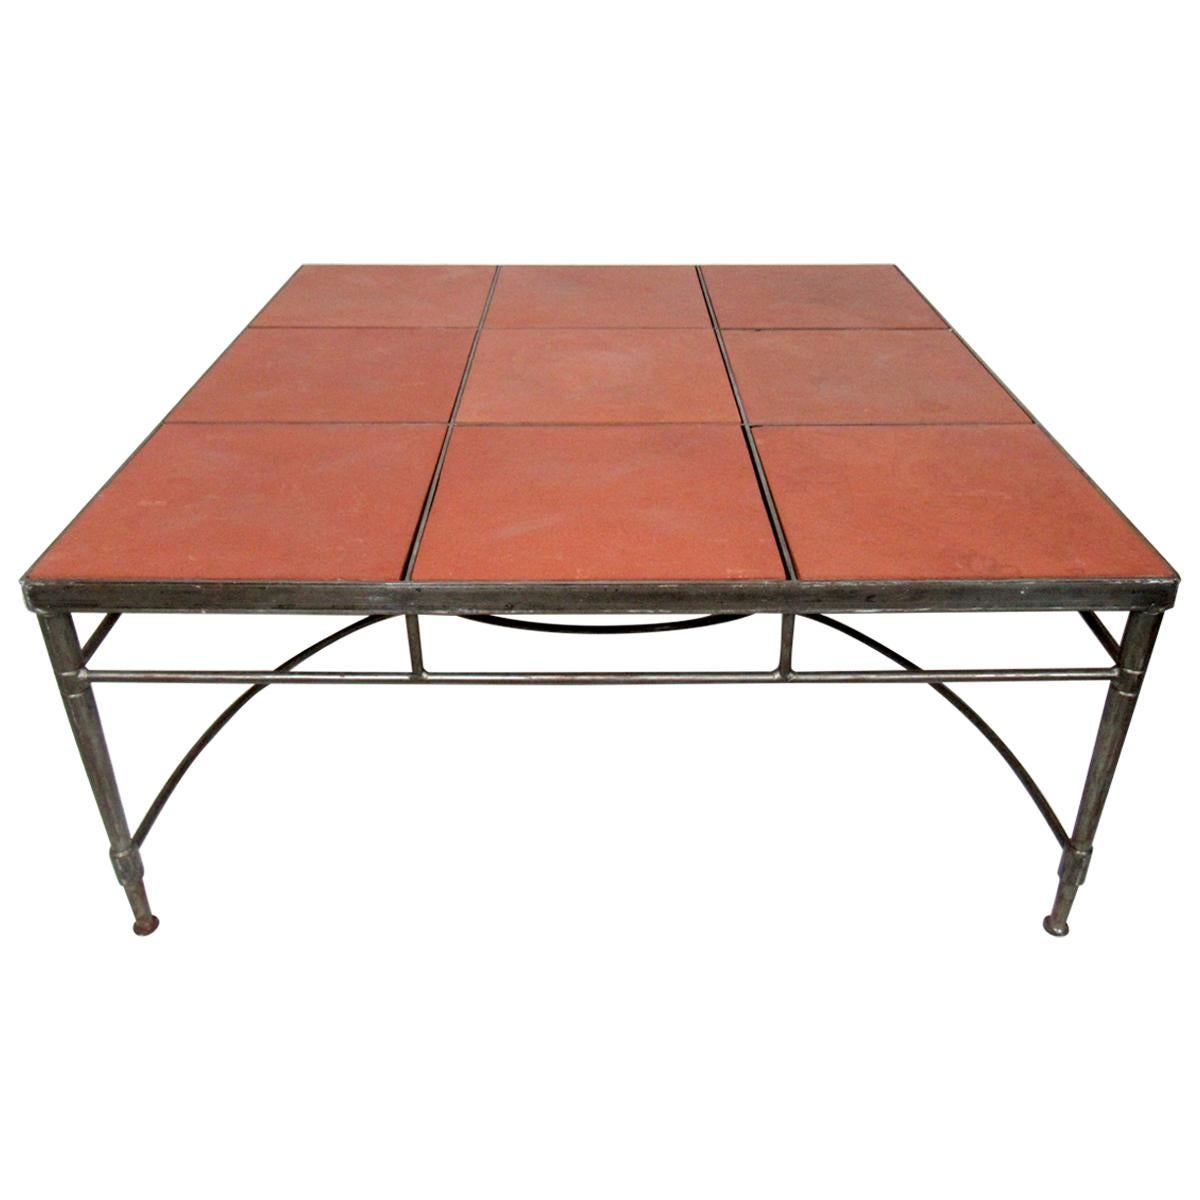 Vintage Industrial Tile Coffee Table For Sale